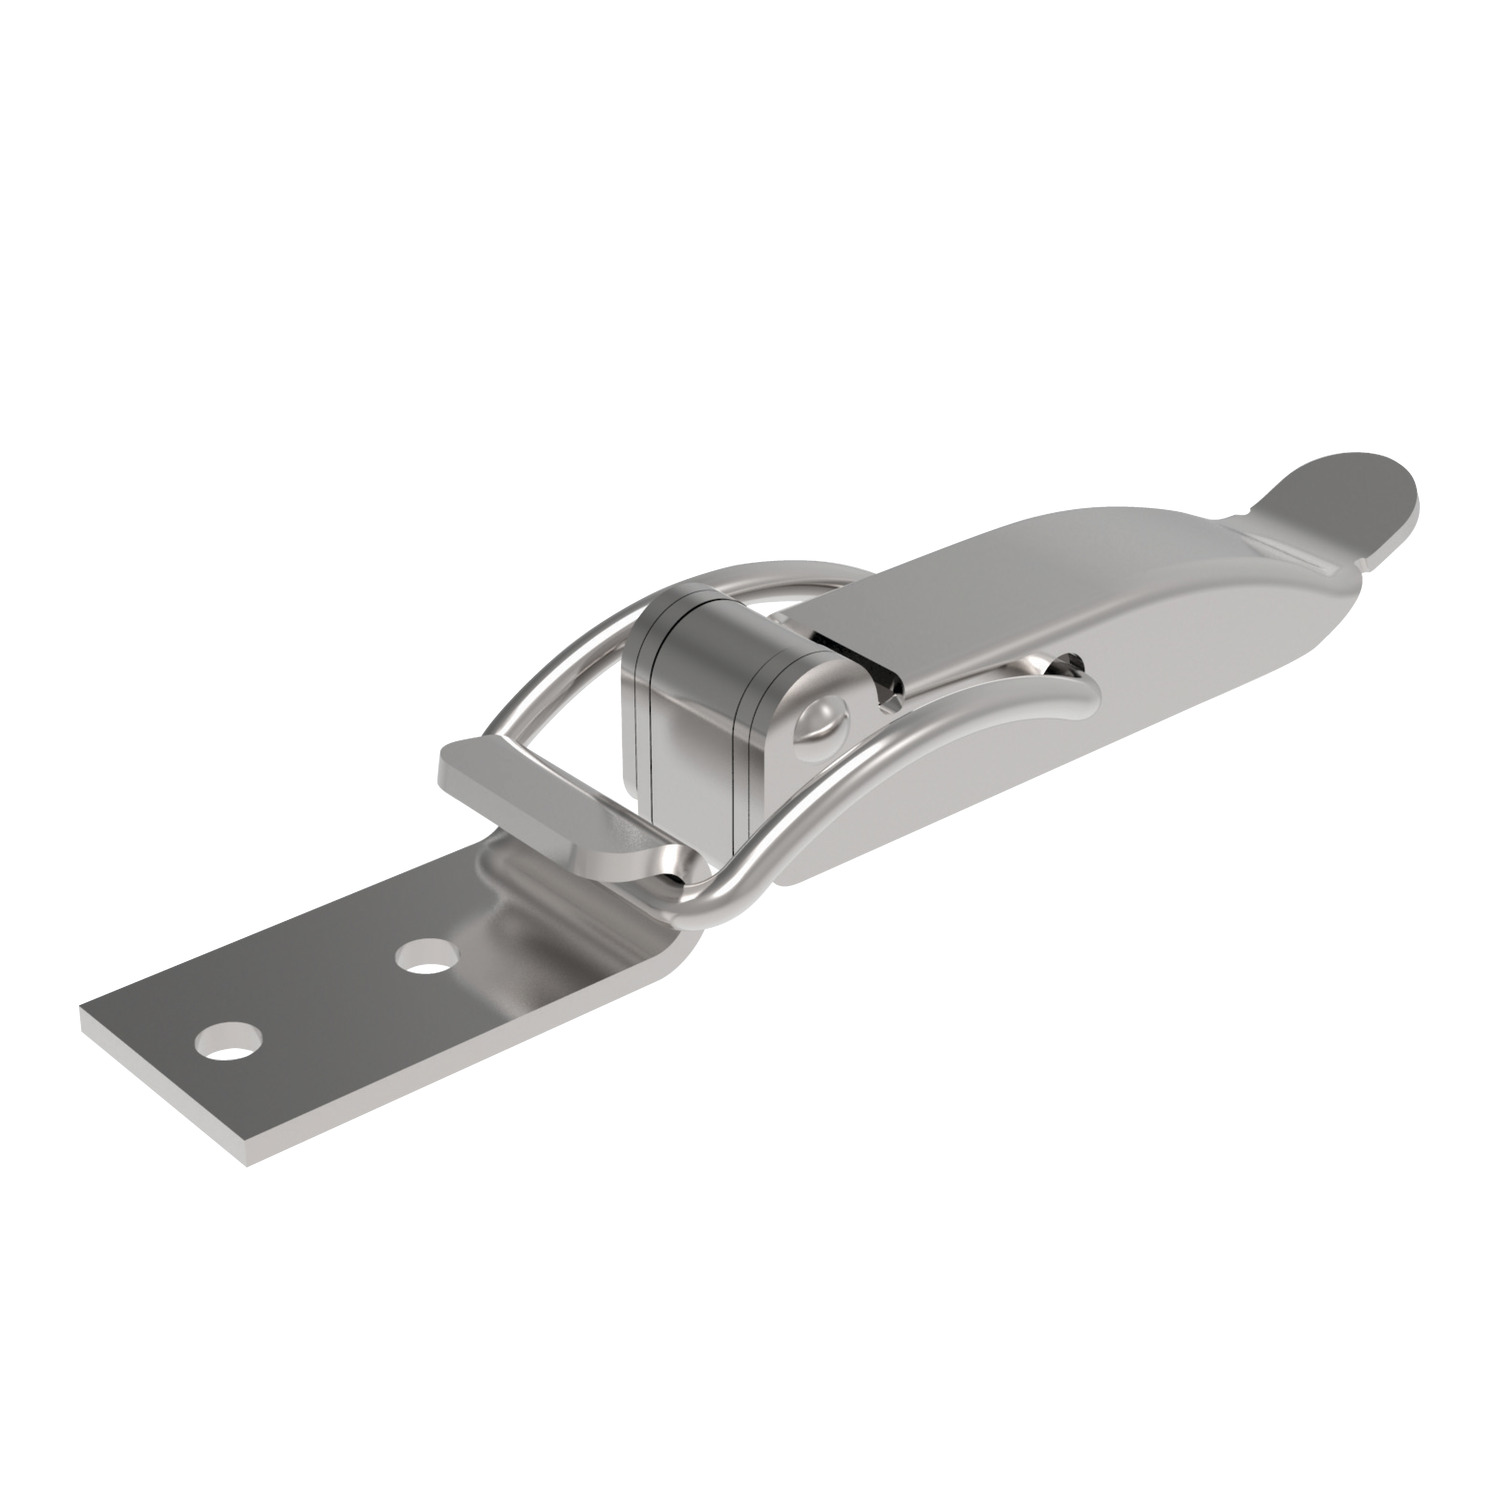 J0550.AC0030 Toggle Latches Stainless Steel - 114 - 17 - 28